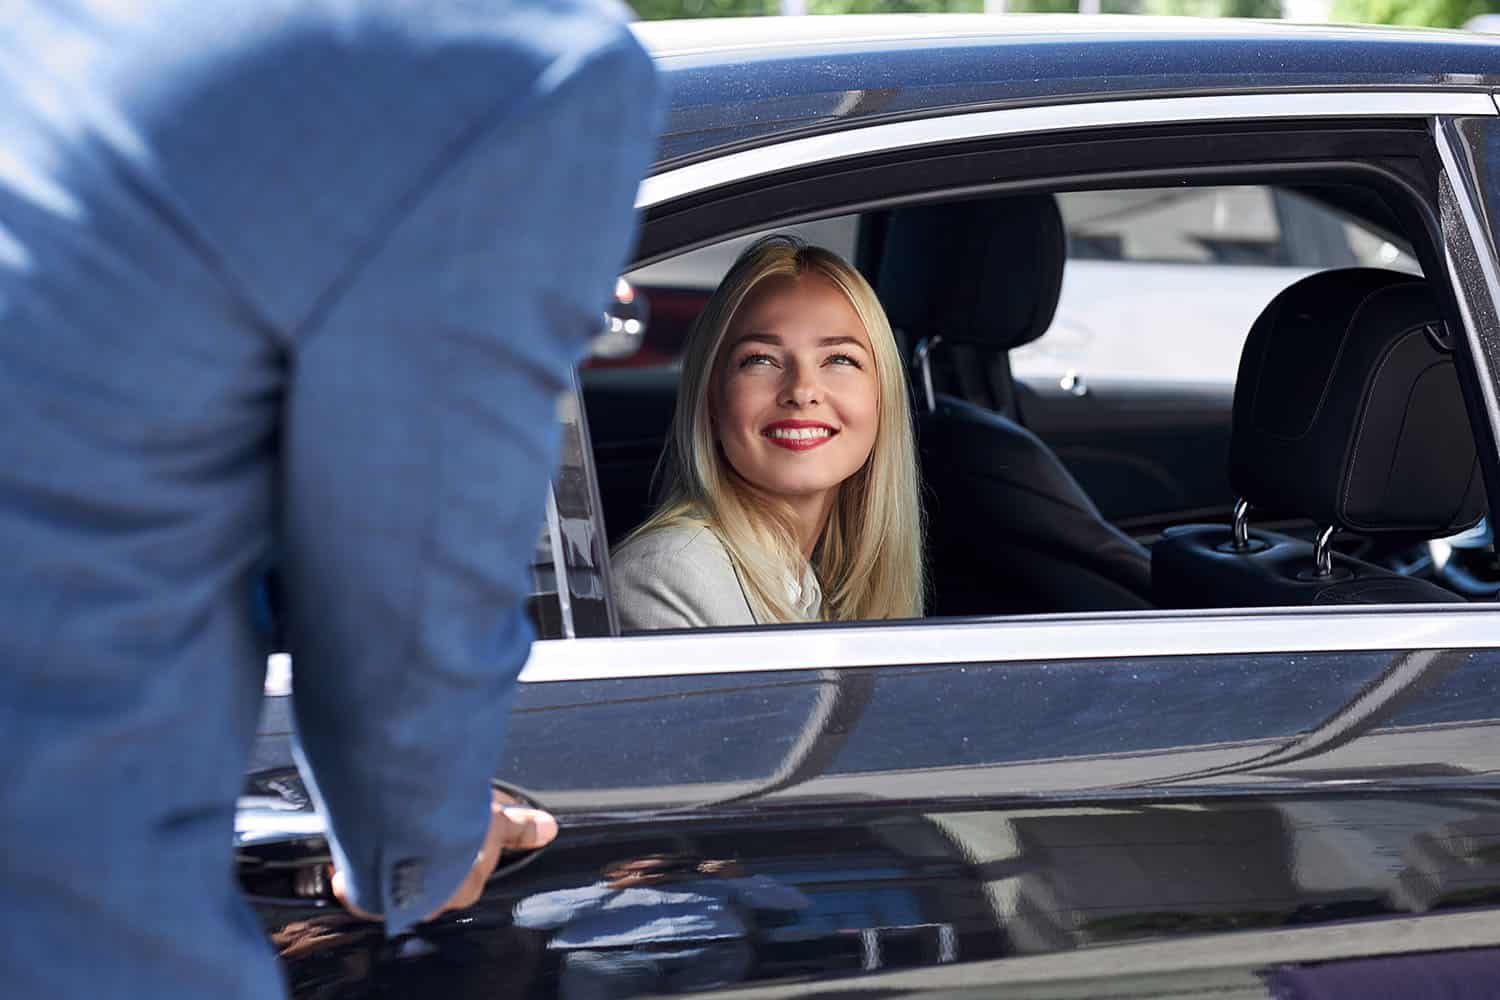 chauffeur opening door for passenger who is smiling